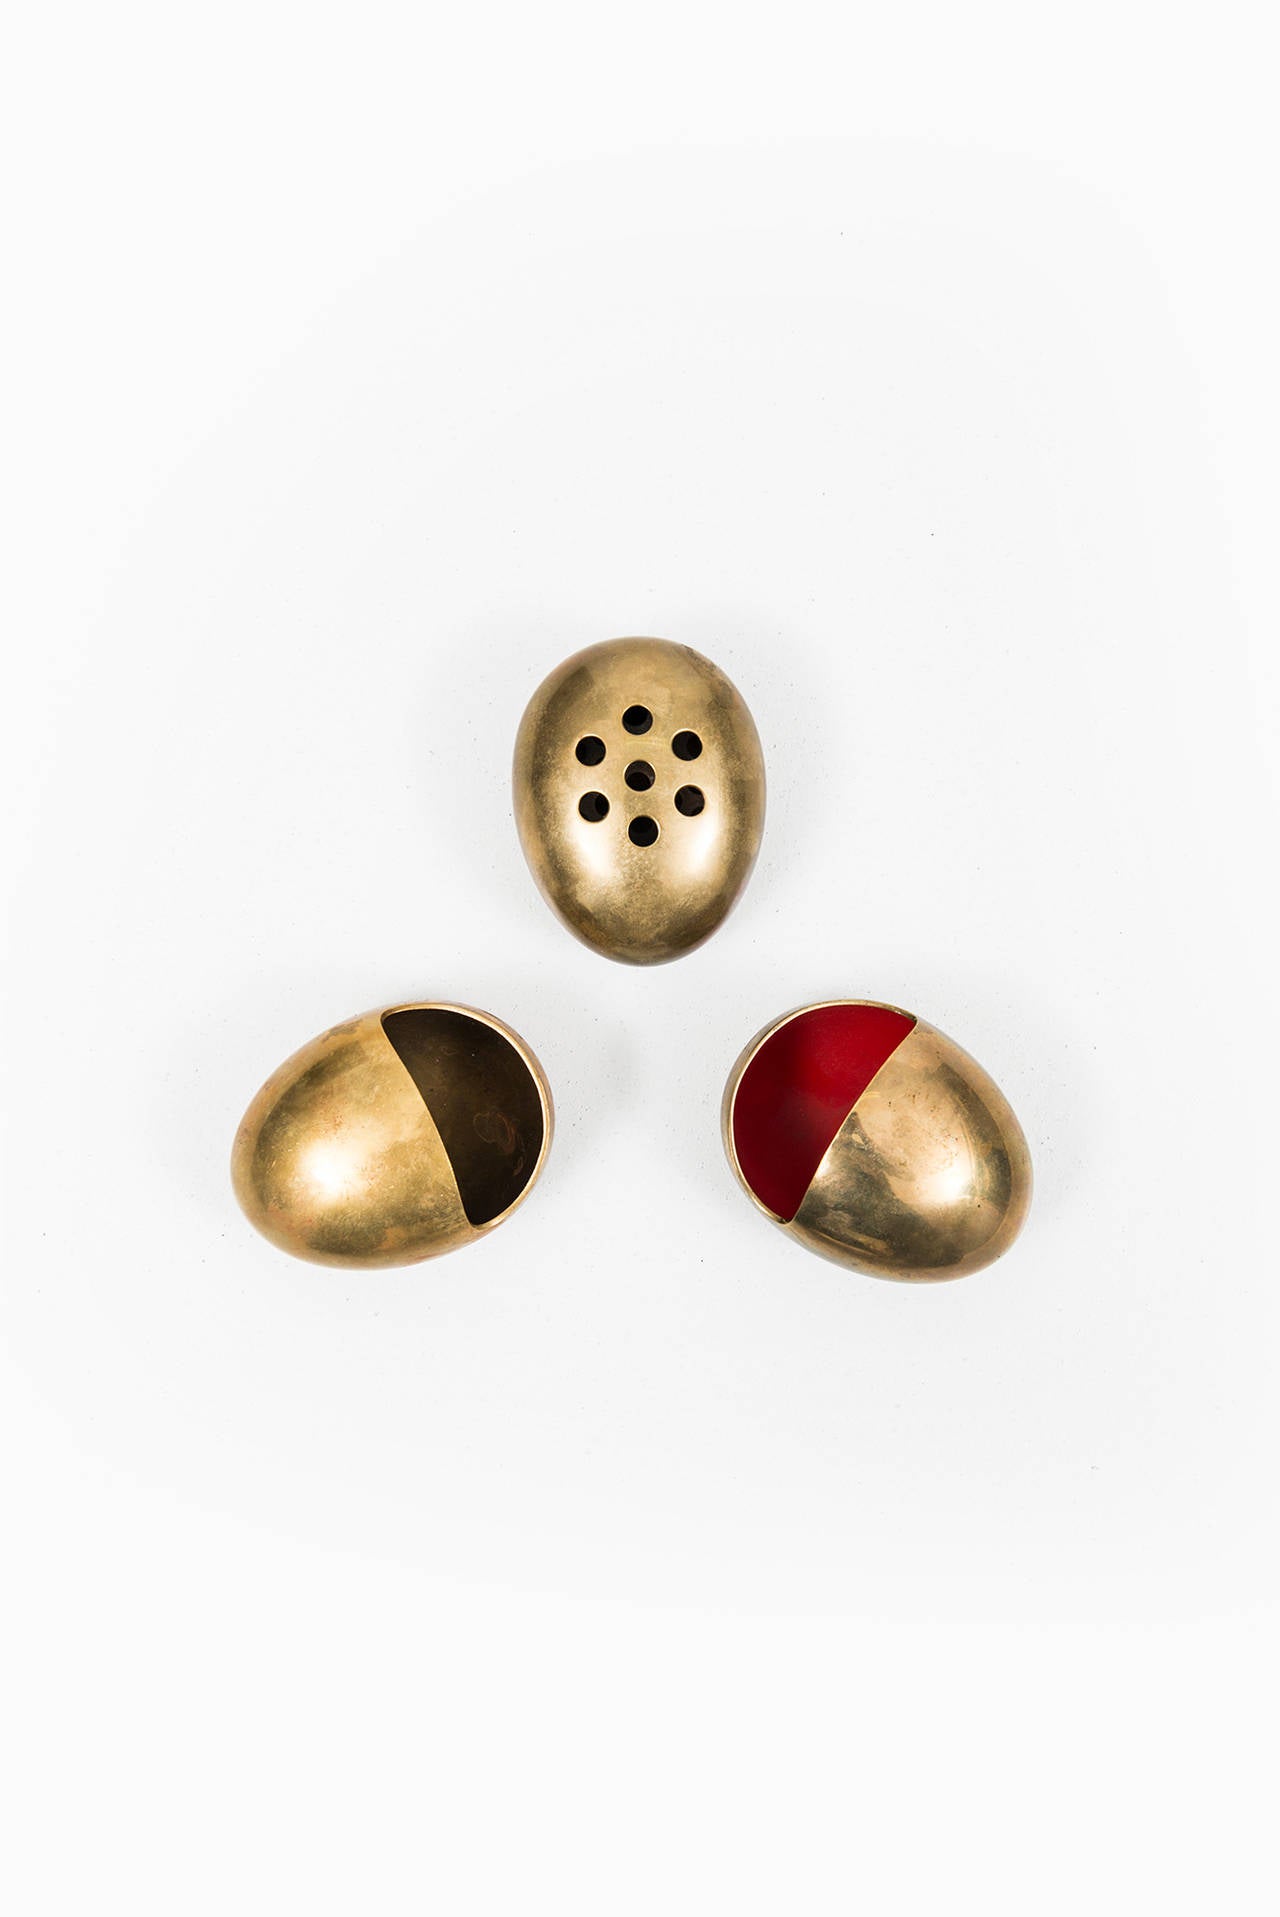 A set of two ashtrays and cigarette holder in brass by Cohr in Denmark.